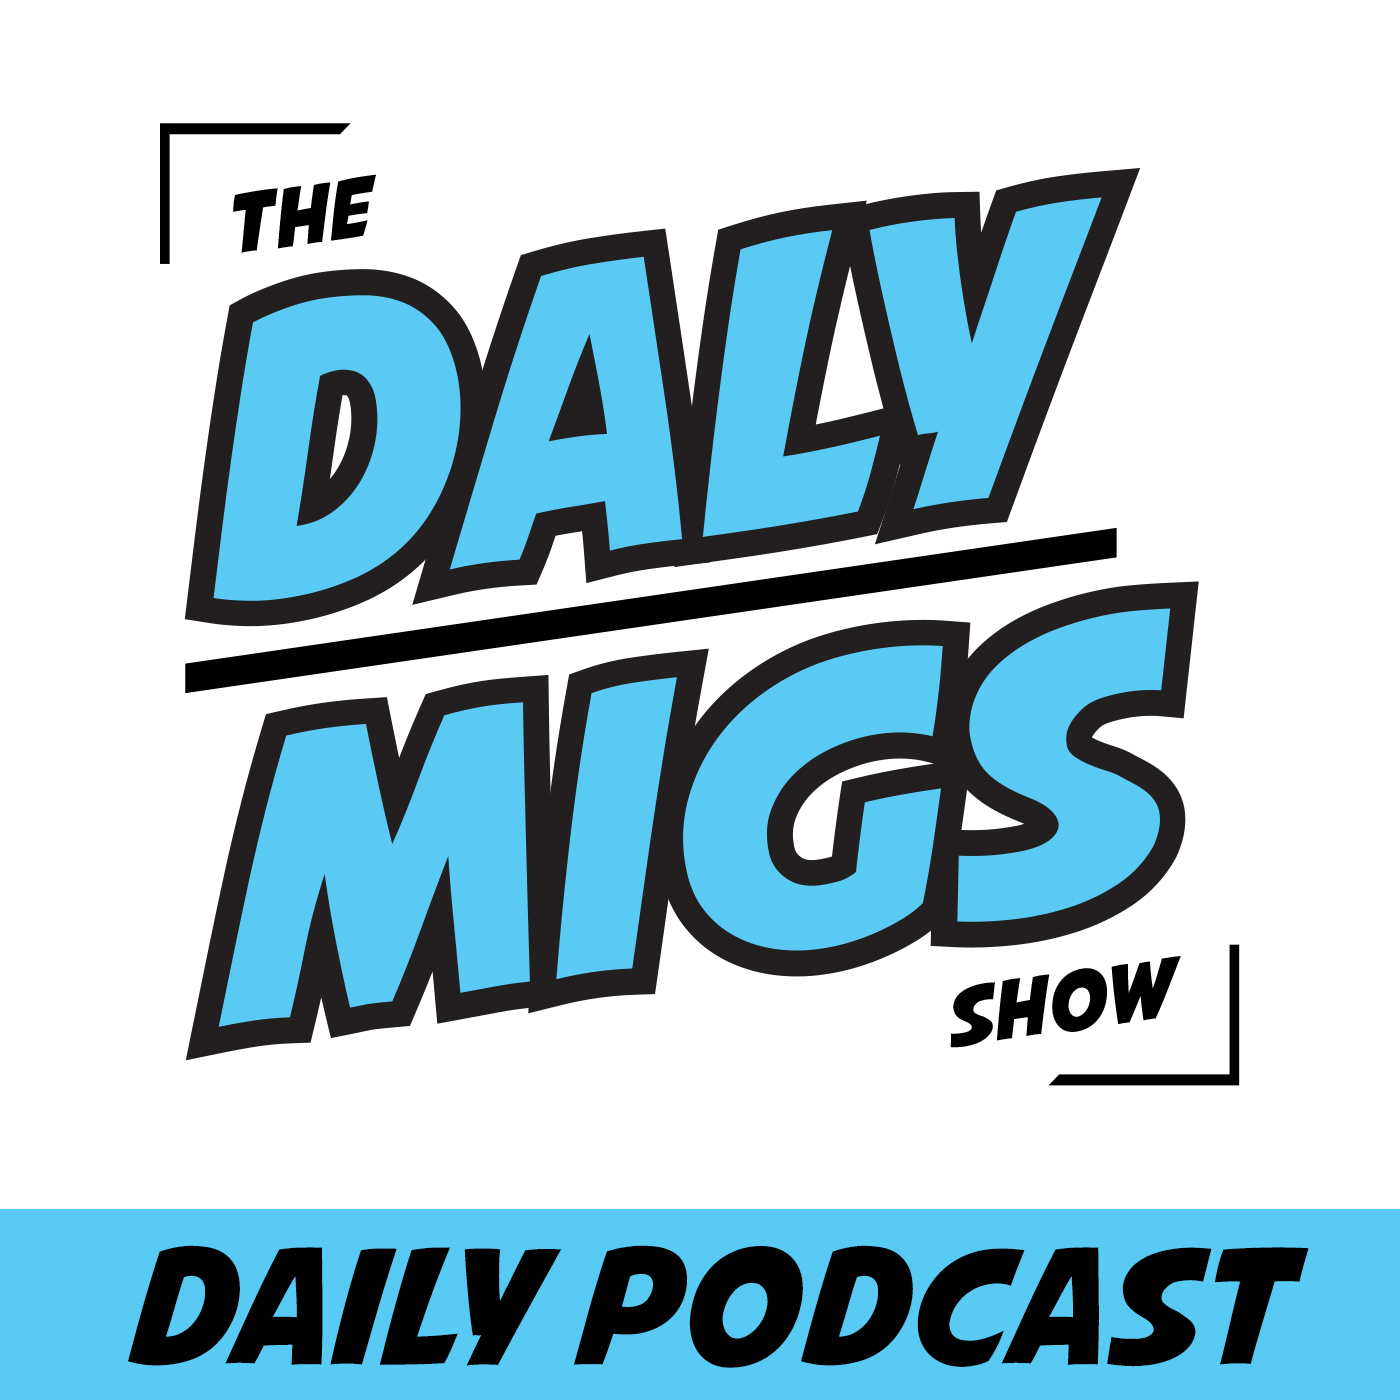 Daily Podcast pt. 4 - "Nirvana and a Whopper?"